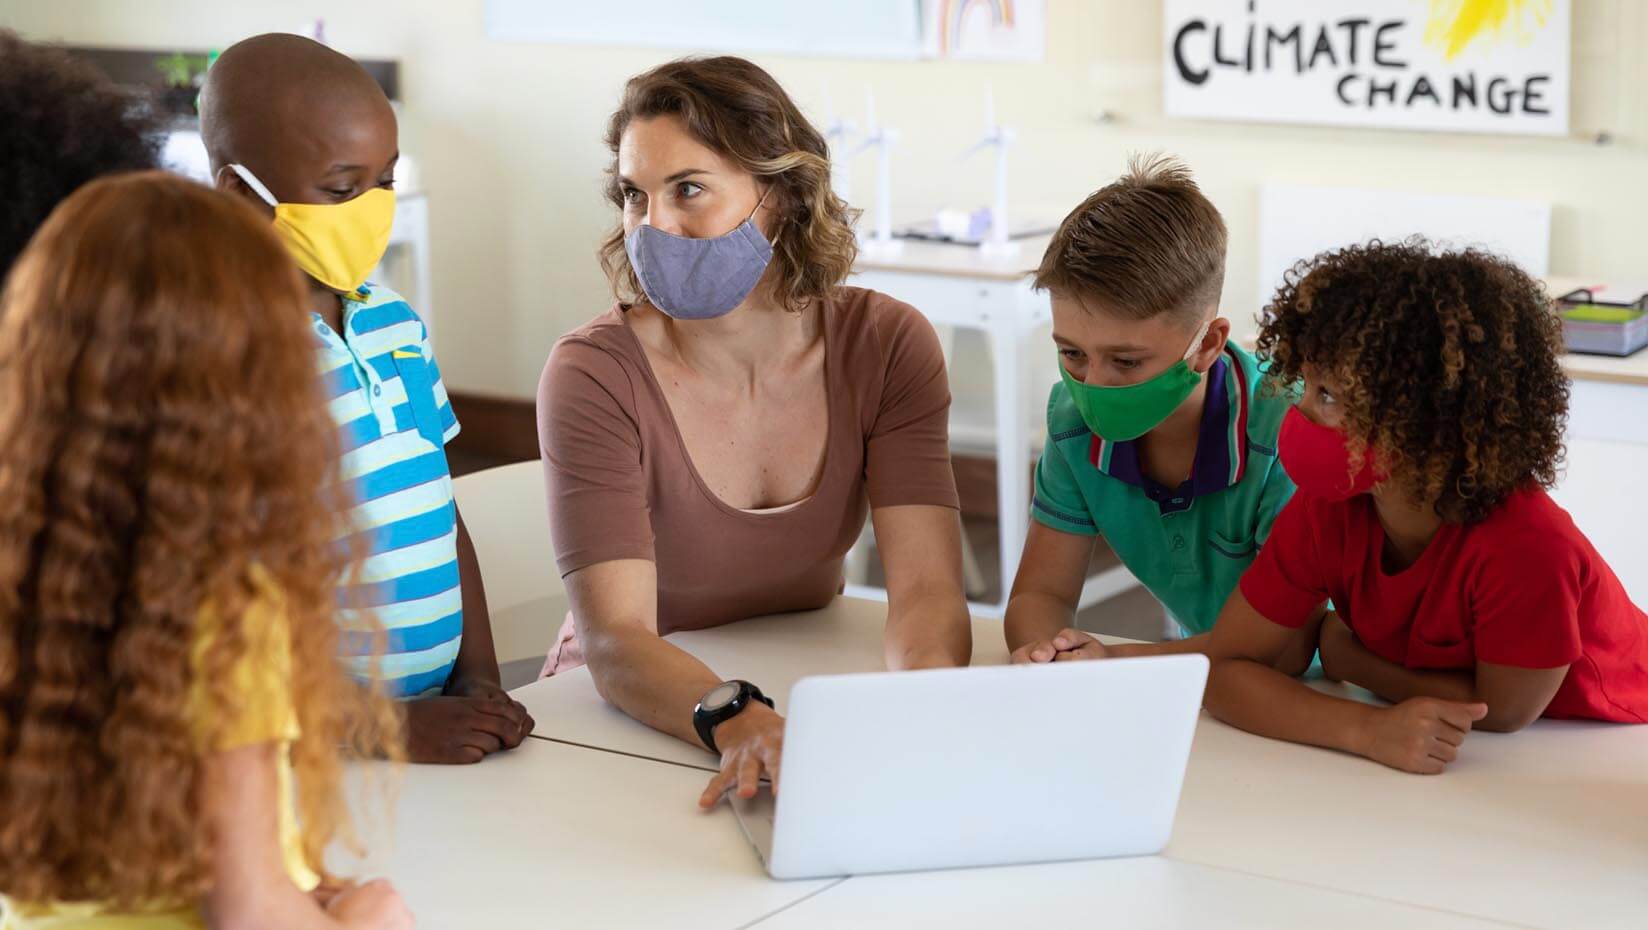 Students and a teacher in a classroom, all wearing face masks